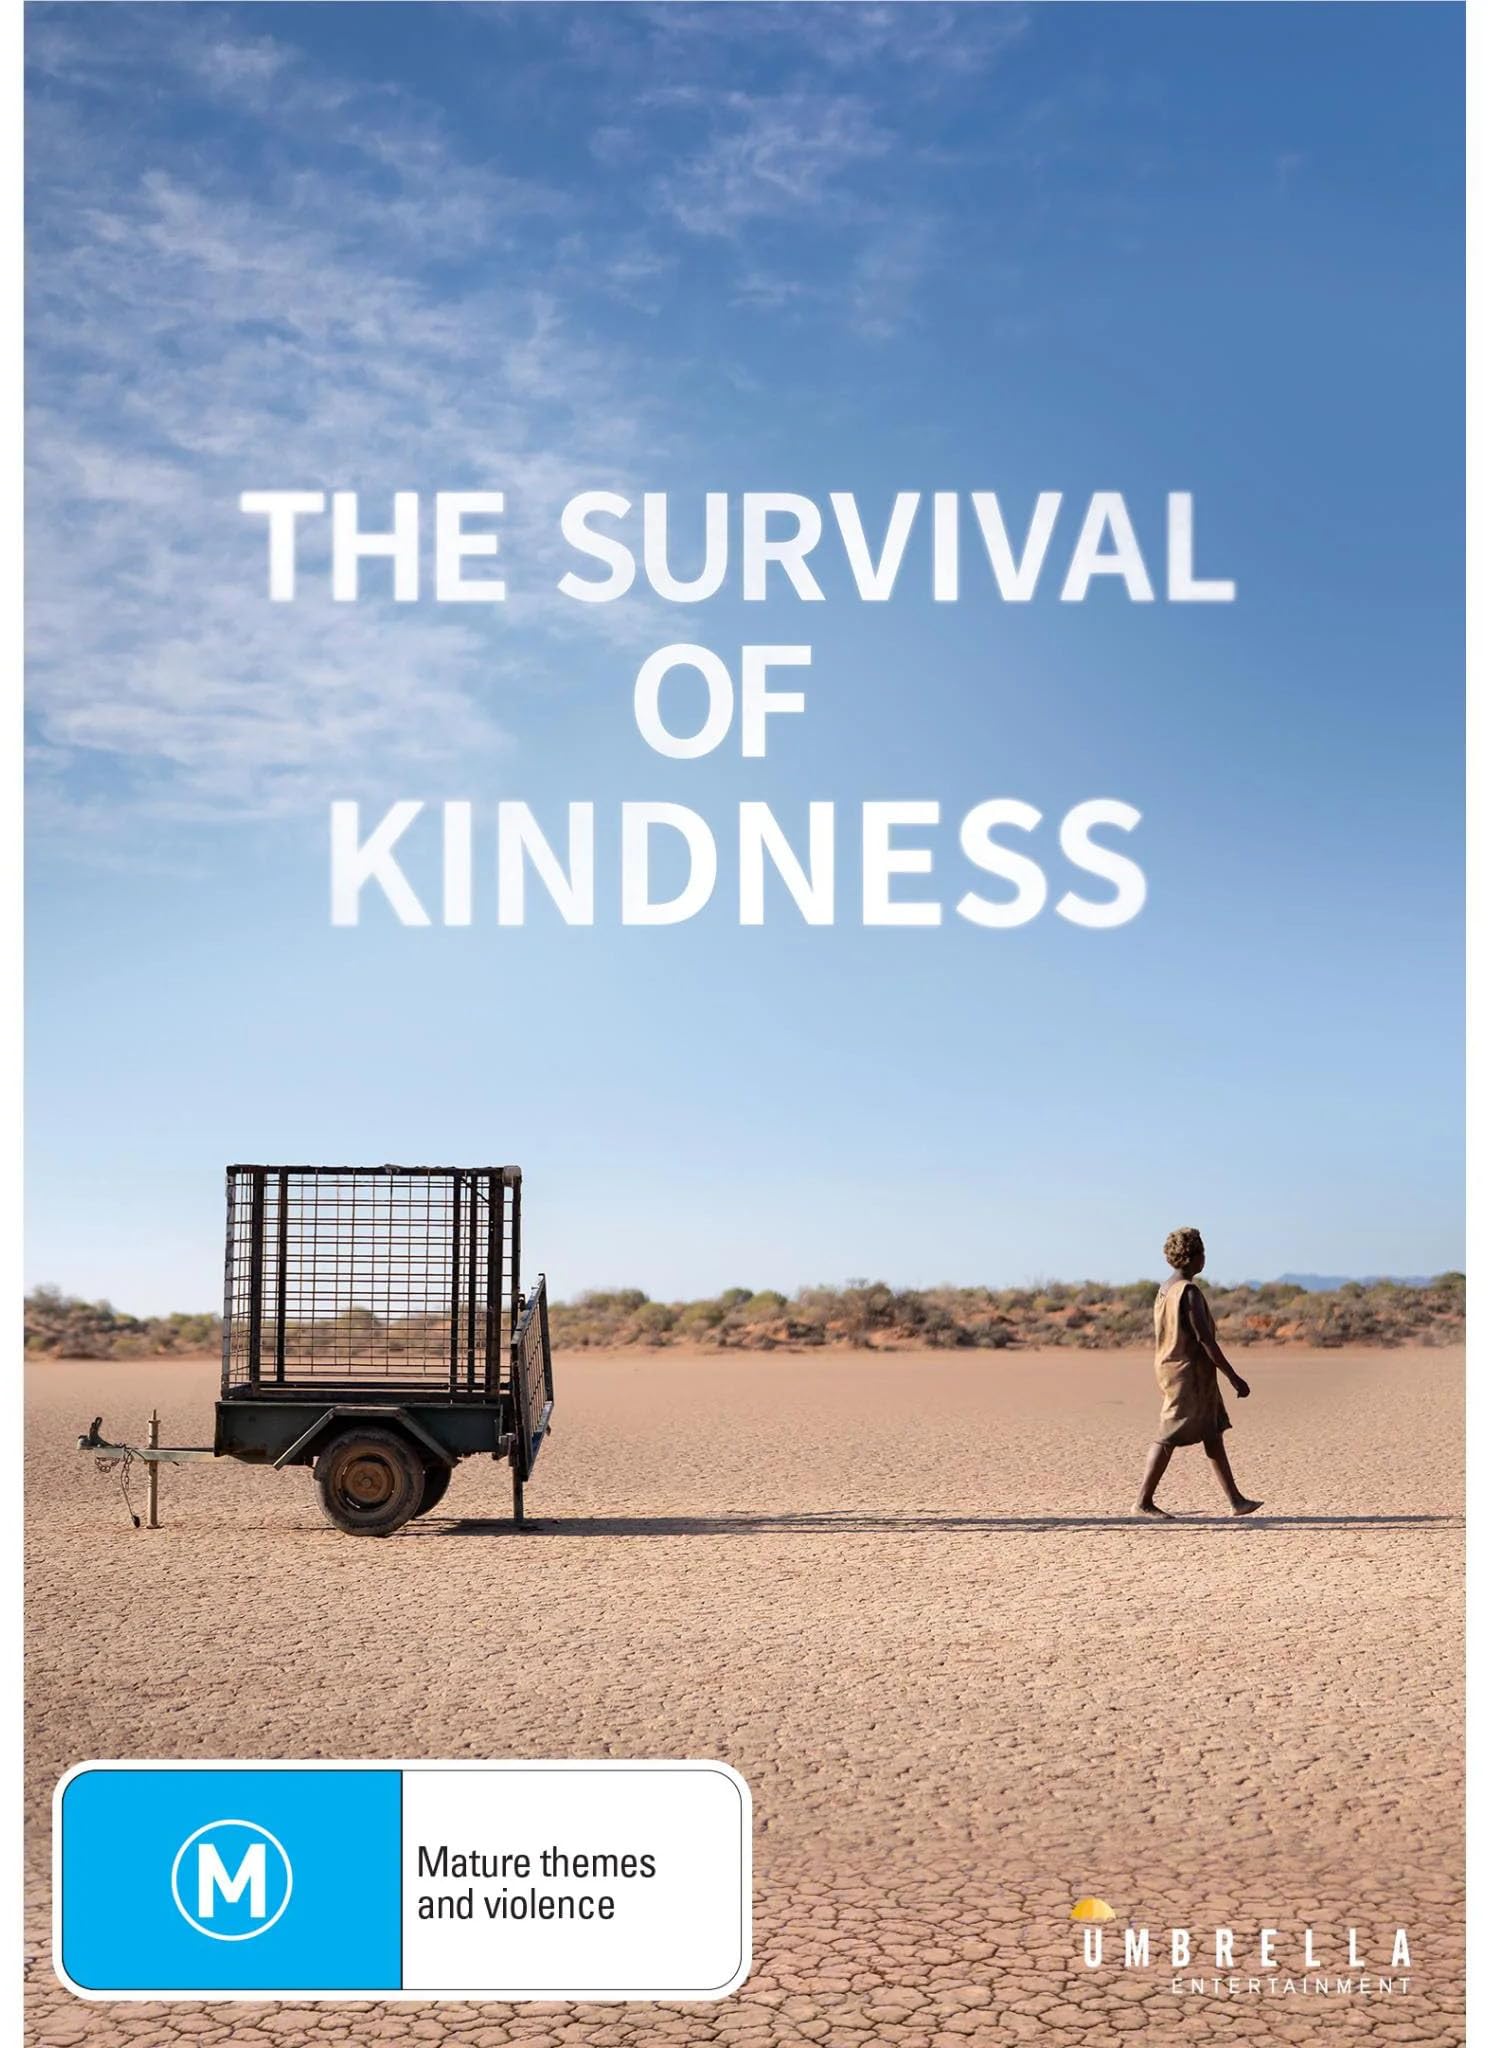 The Survival of Kindness on MovieShack